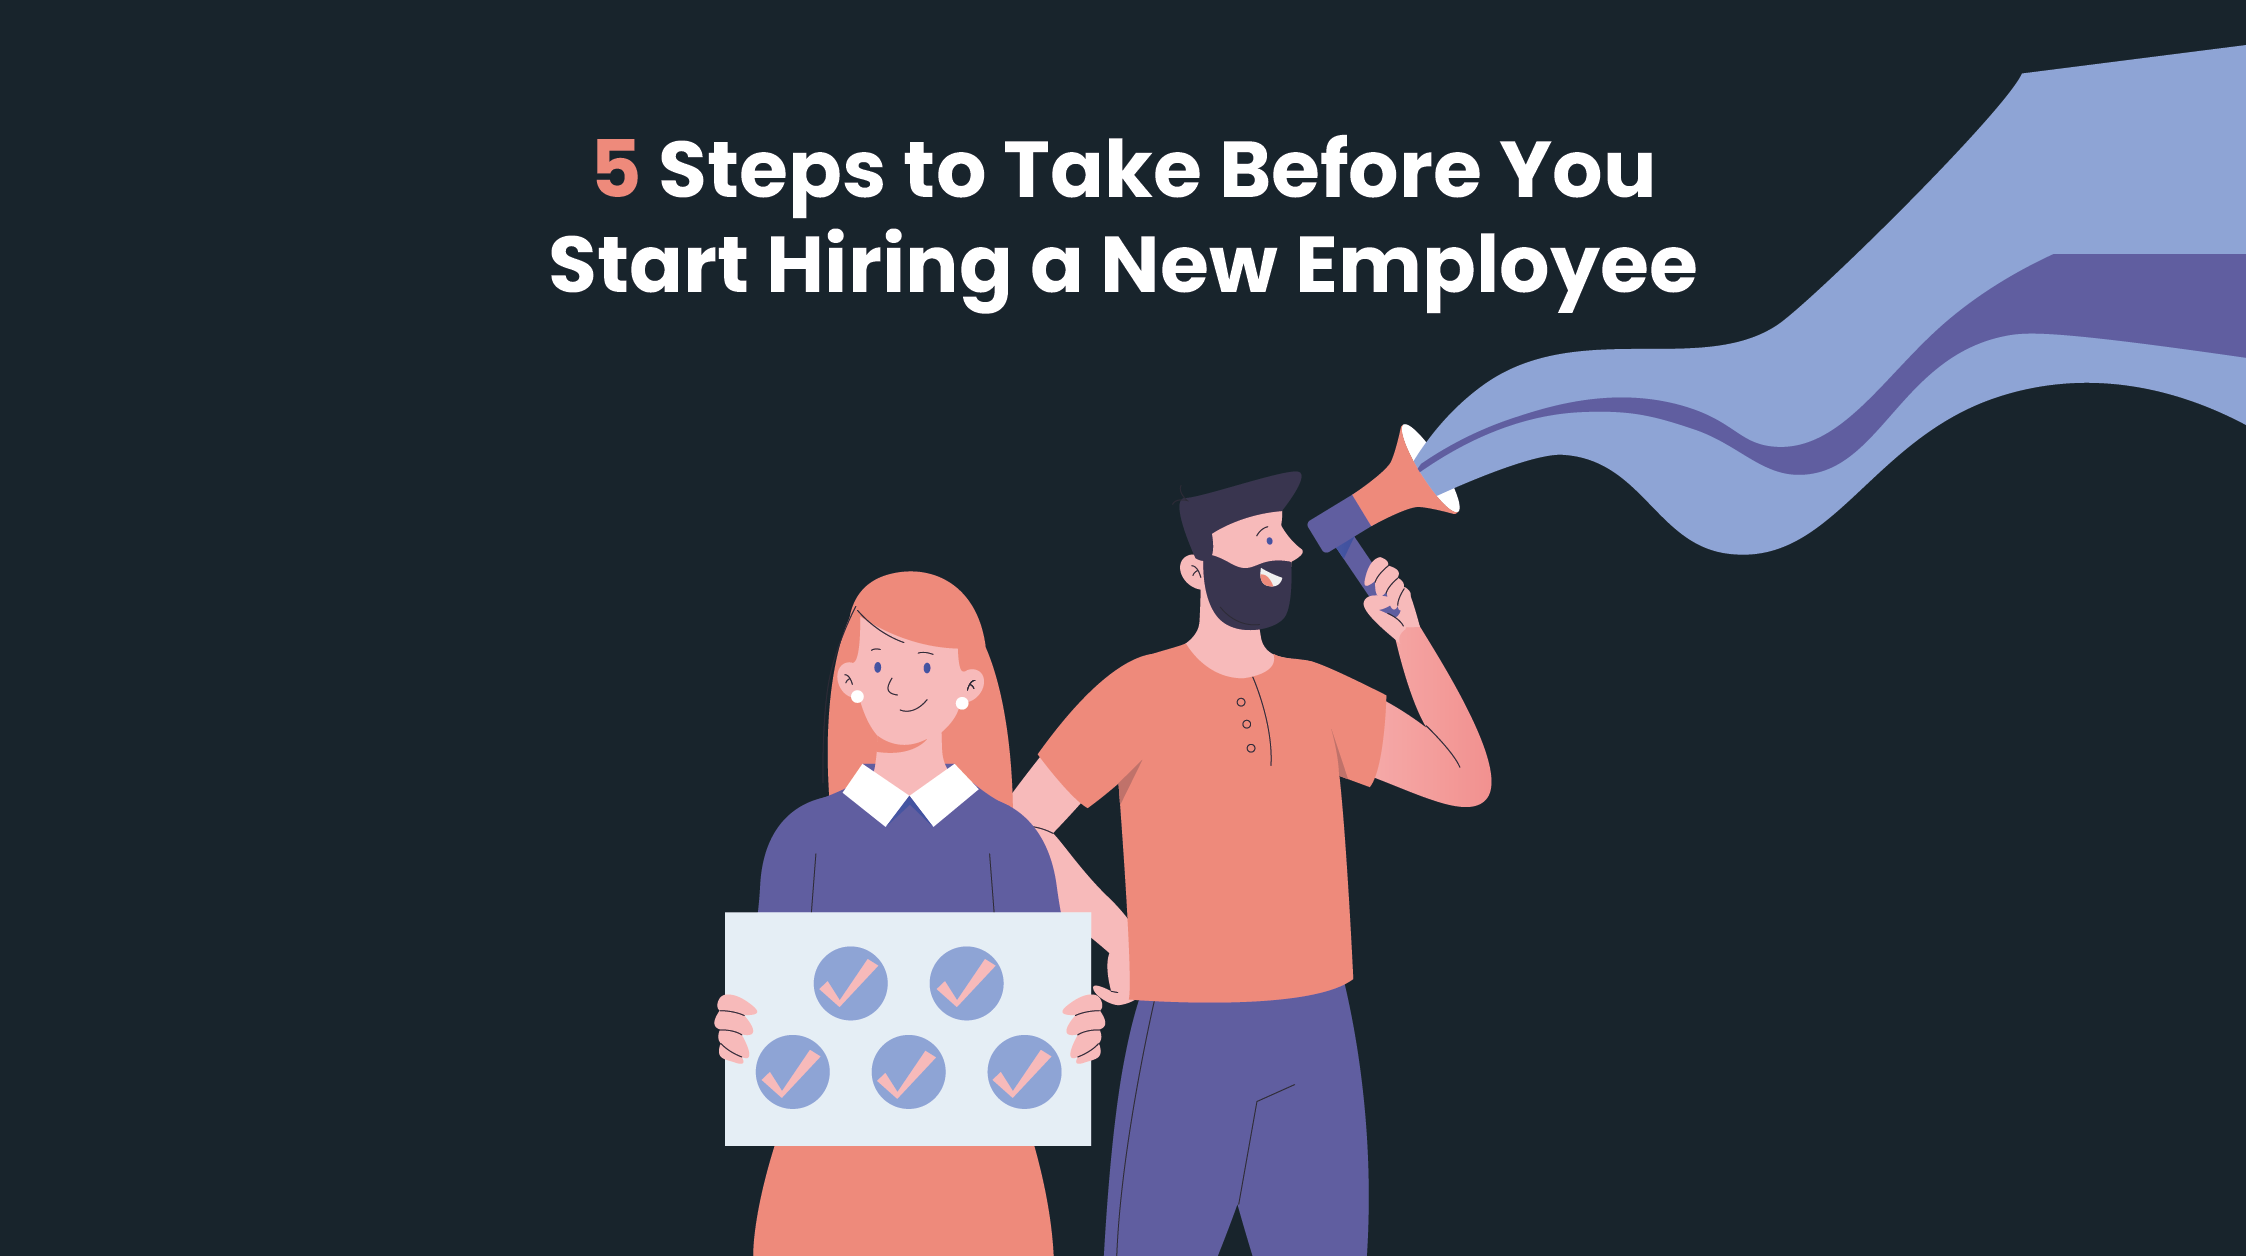 5 Steps to Take Before You Start Hiring a New Employee